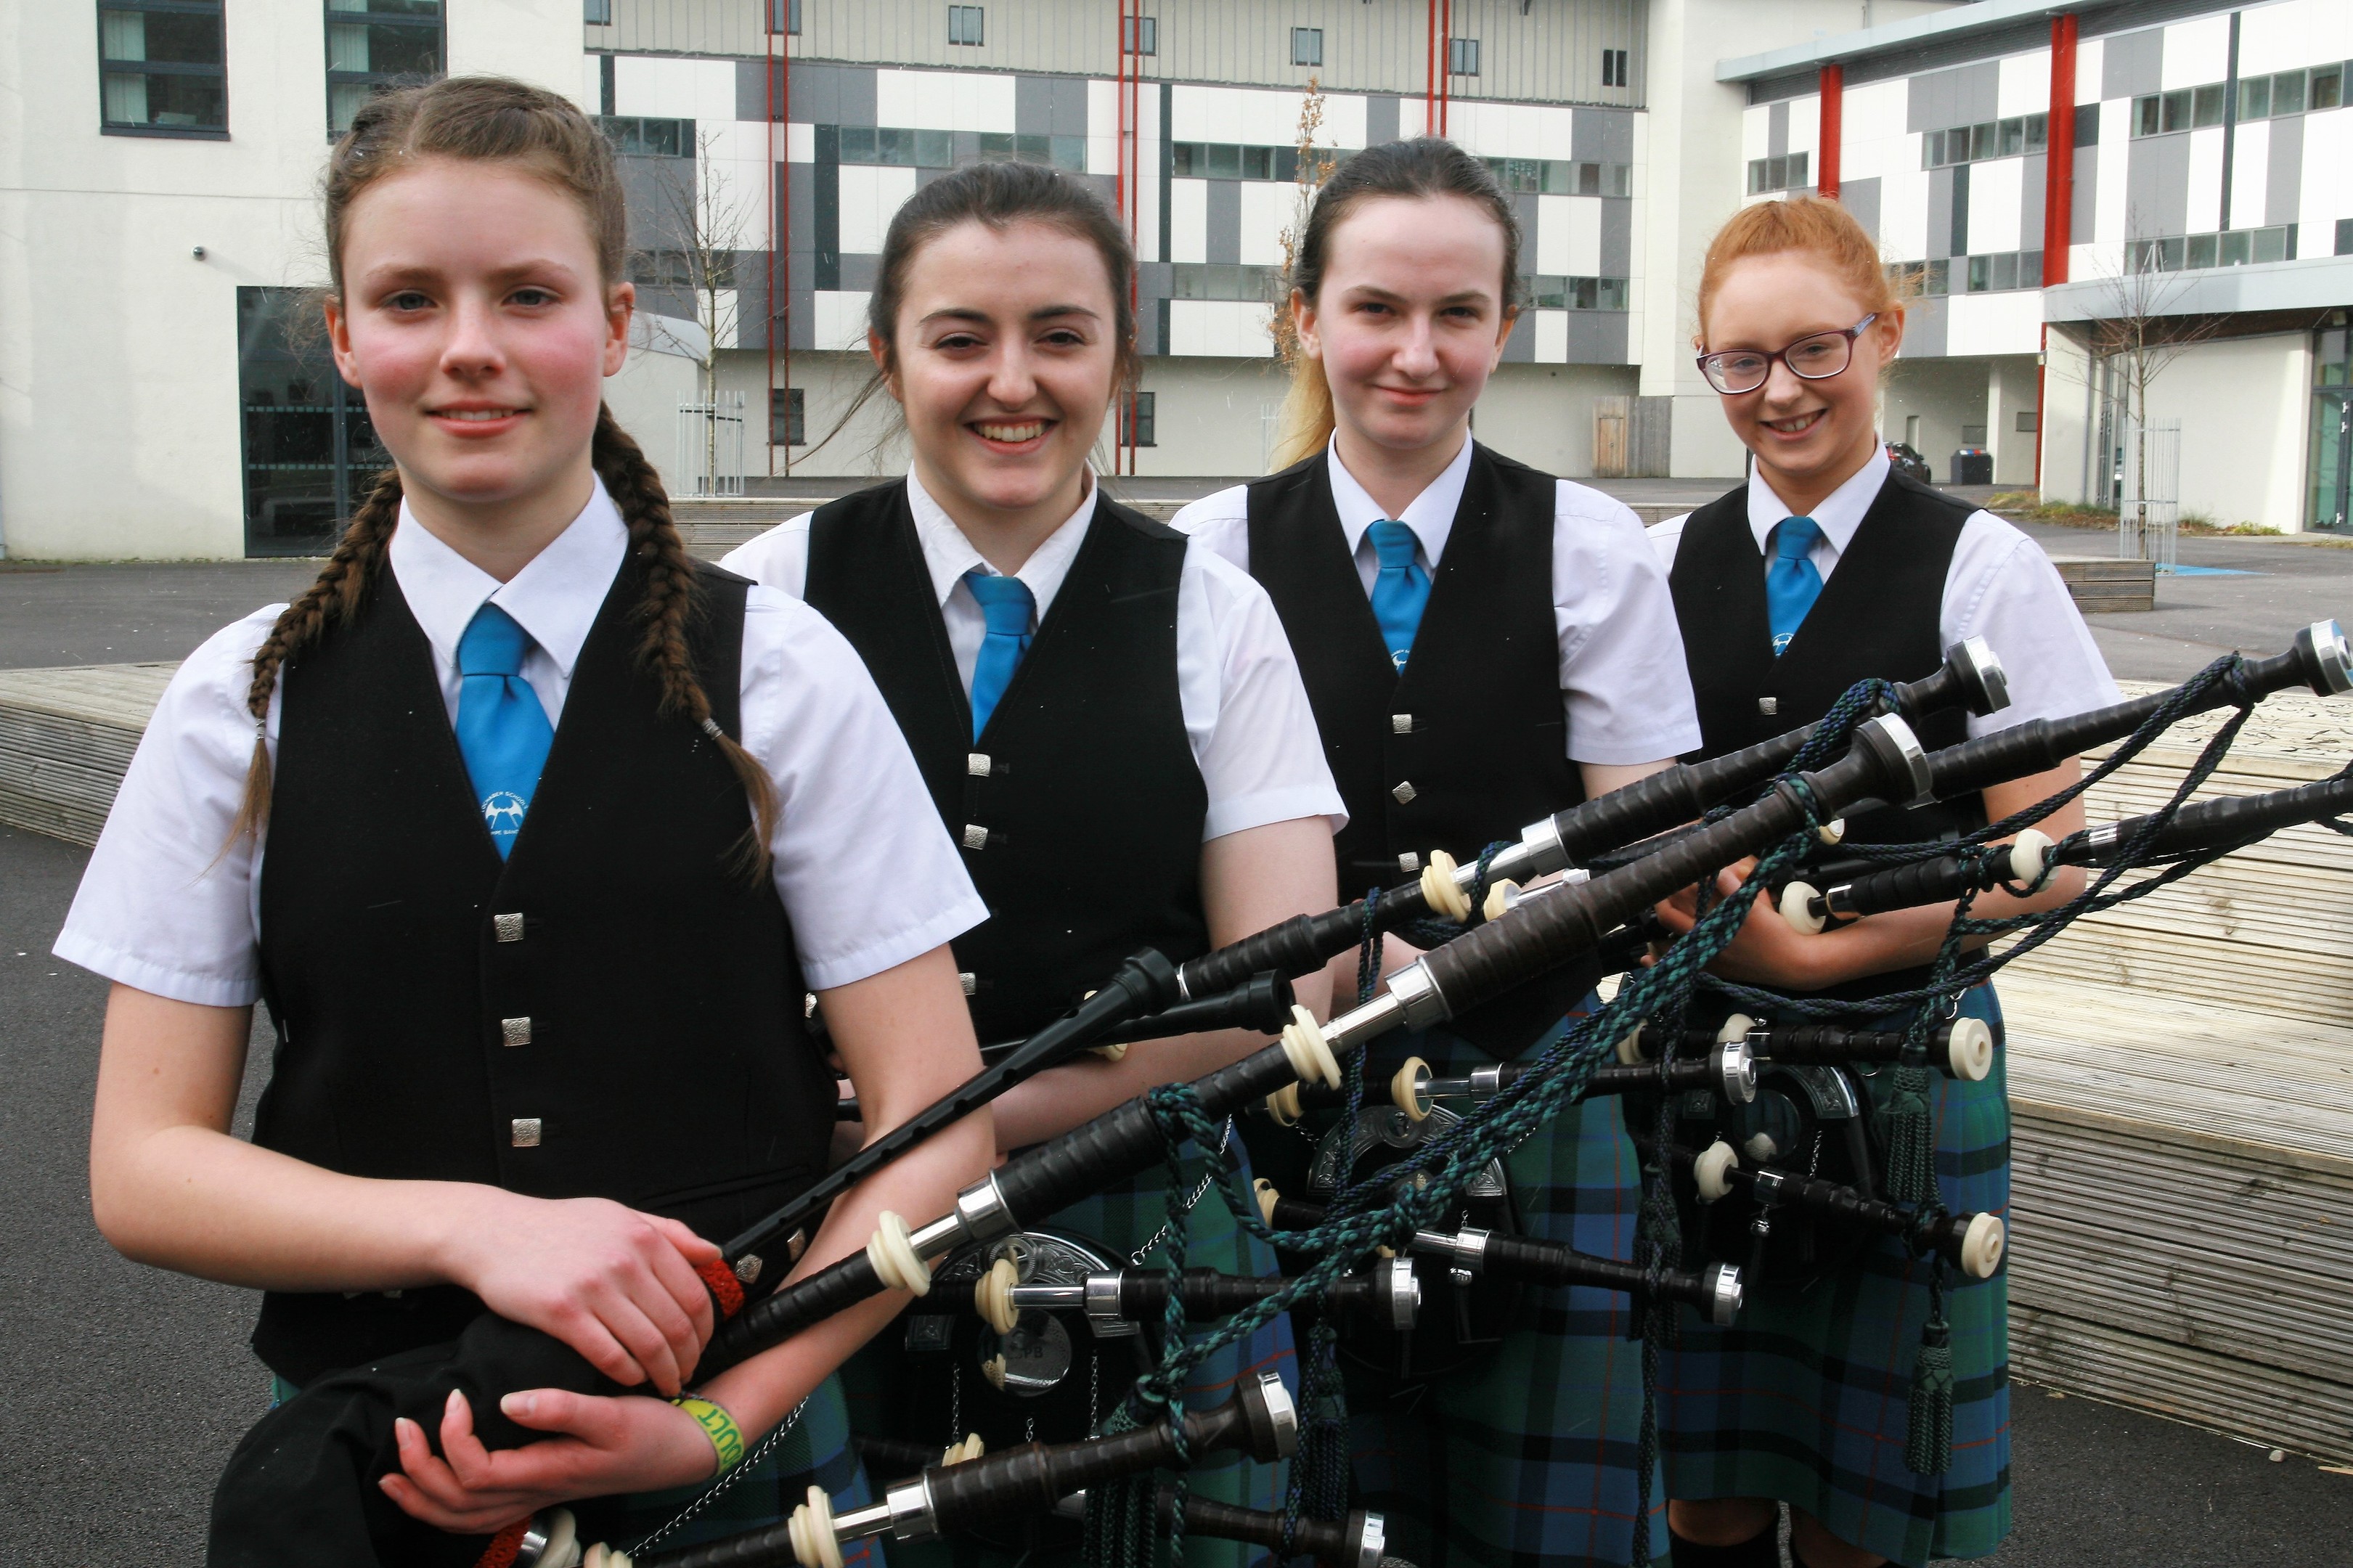 Winners of the Bagpipe Quartet 18 years and Under at The Lochaber Music Festival Lochaber High School Quartet